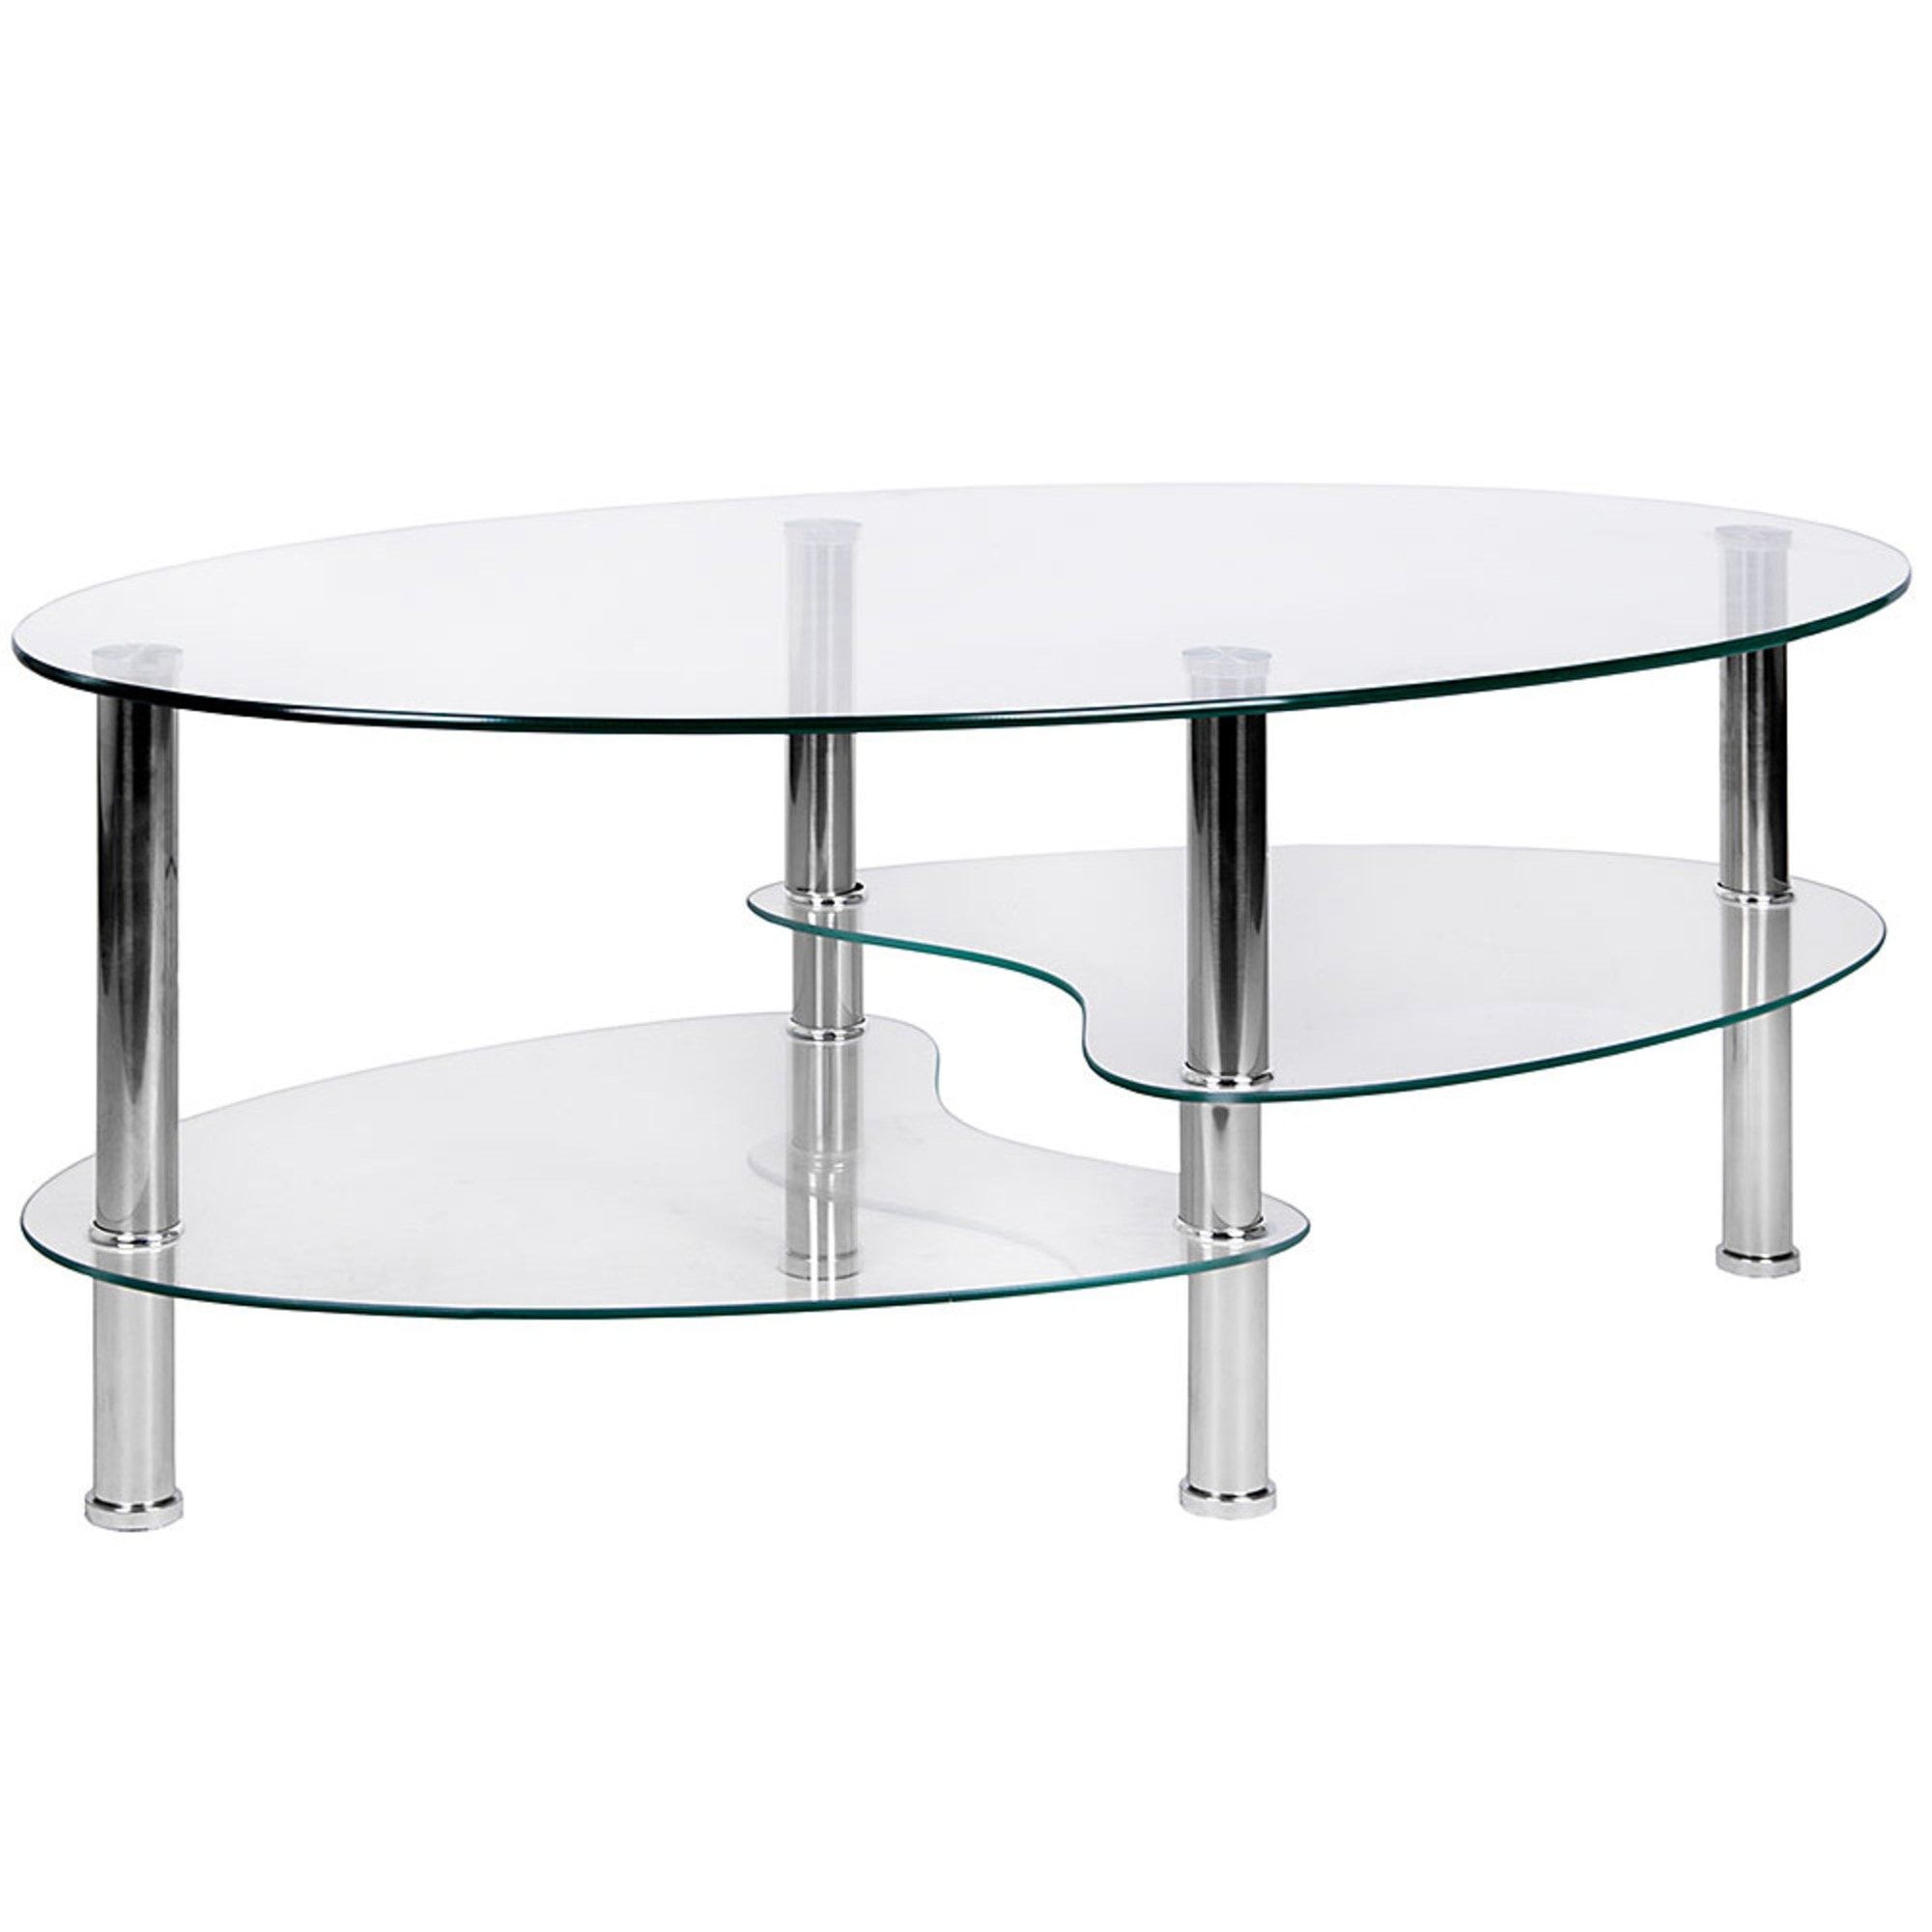 Cara Oval Clear Glass Coffee Table | Dining | Glass Furniture Pertaining To Oval Glass Coffee Tables (Gallery 12 of 20)